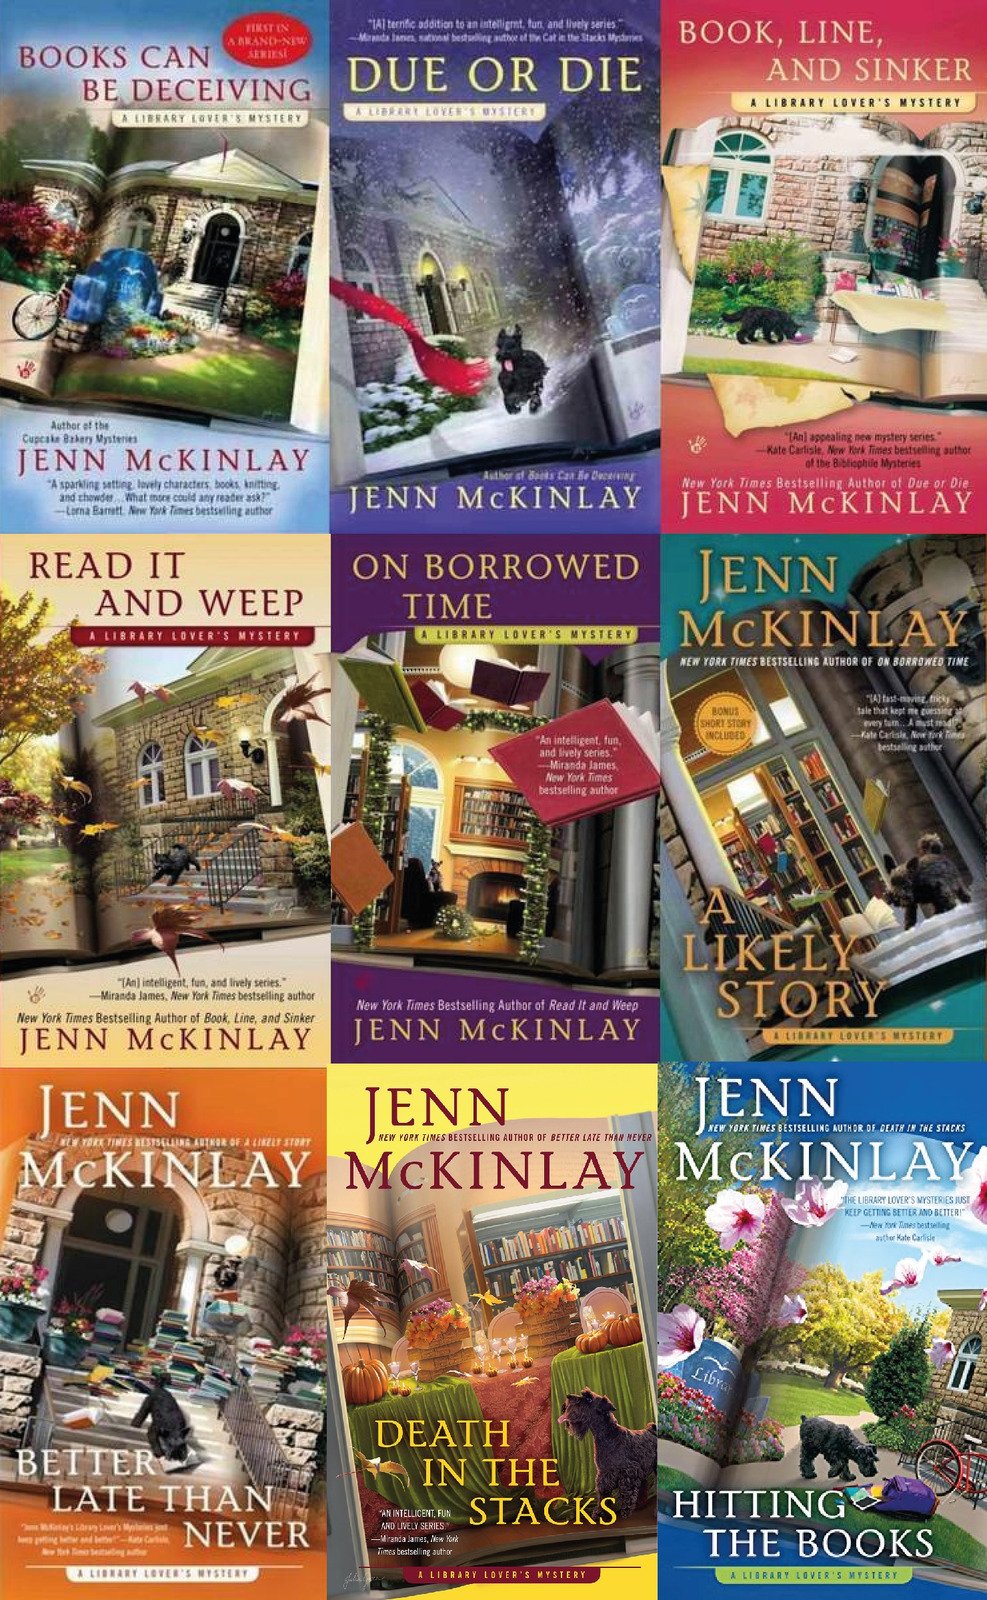 The Library Lover’s Series by Jenn McKinlay ~ 13 MP3 AUDIOBOOK COLLECTION